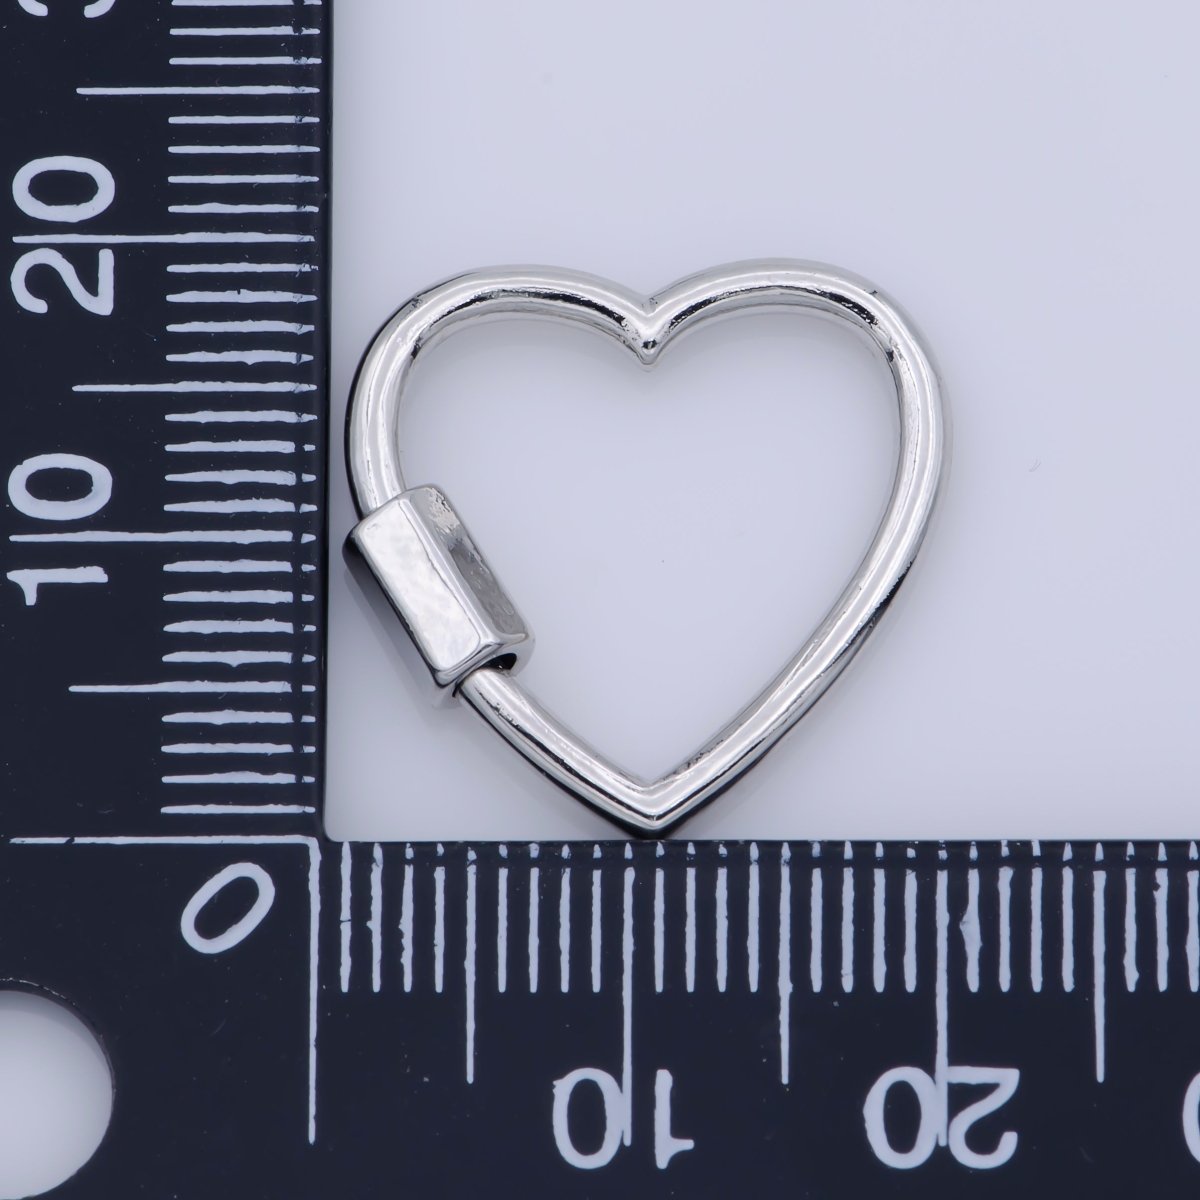 Dainty Heart Clasp in Gold Filled - White Gold Filled Love with Screw On Mechanism carabiner clasp Bracelet Clasp 20mmx19mm K-265 - DLUXCA